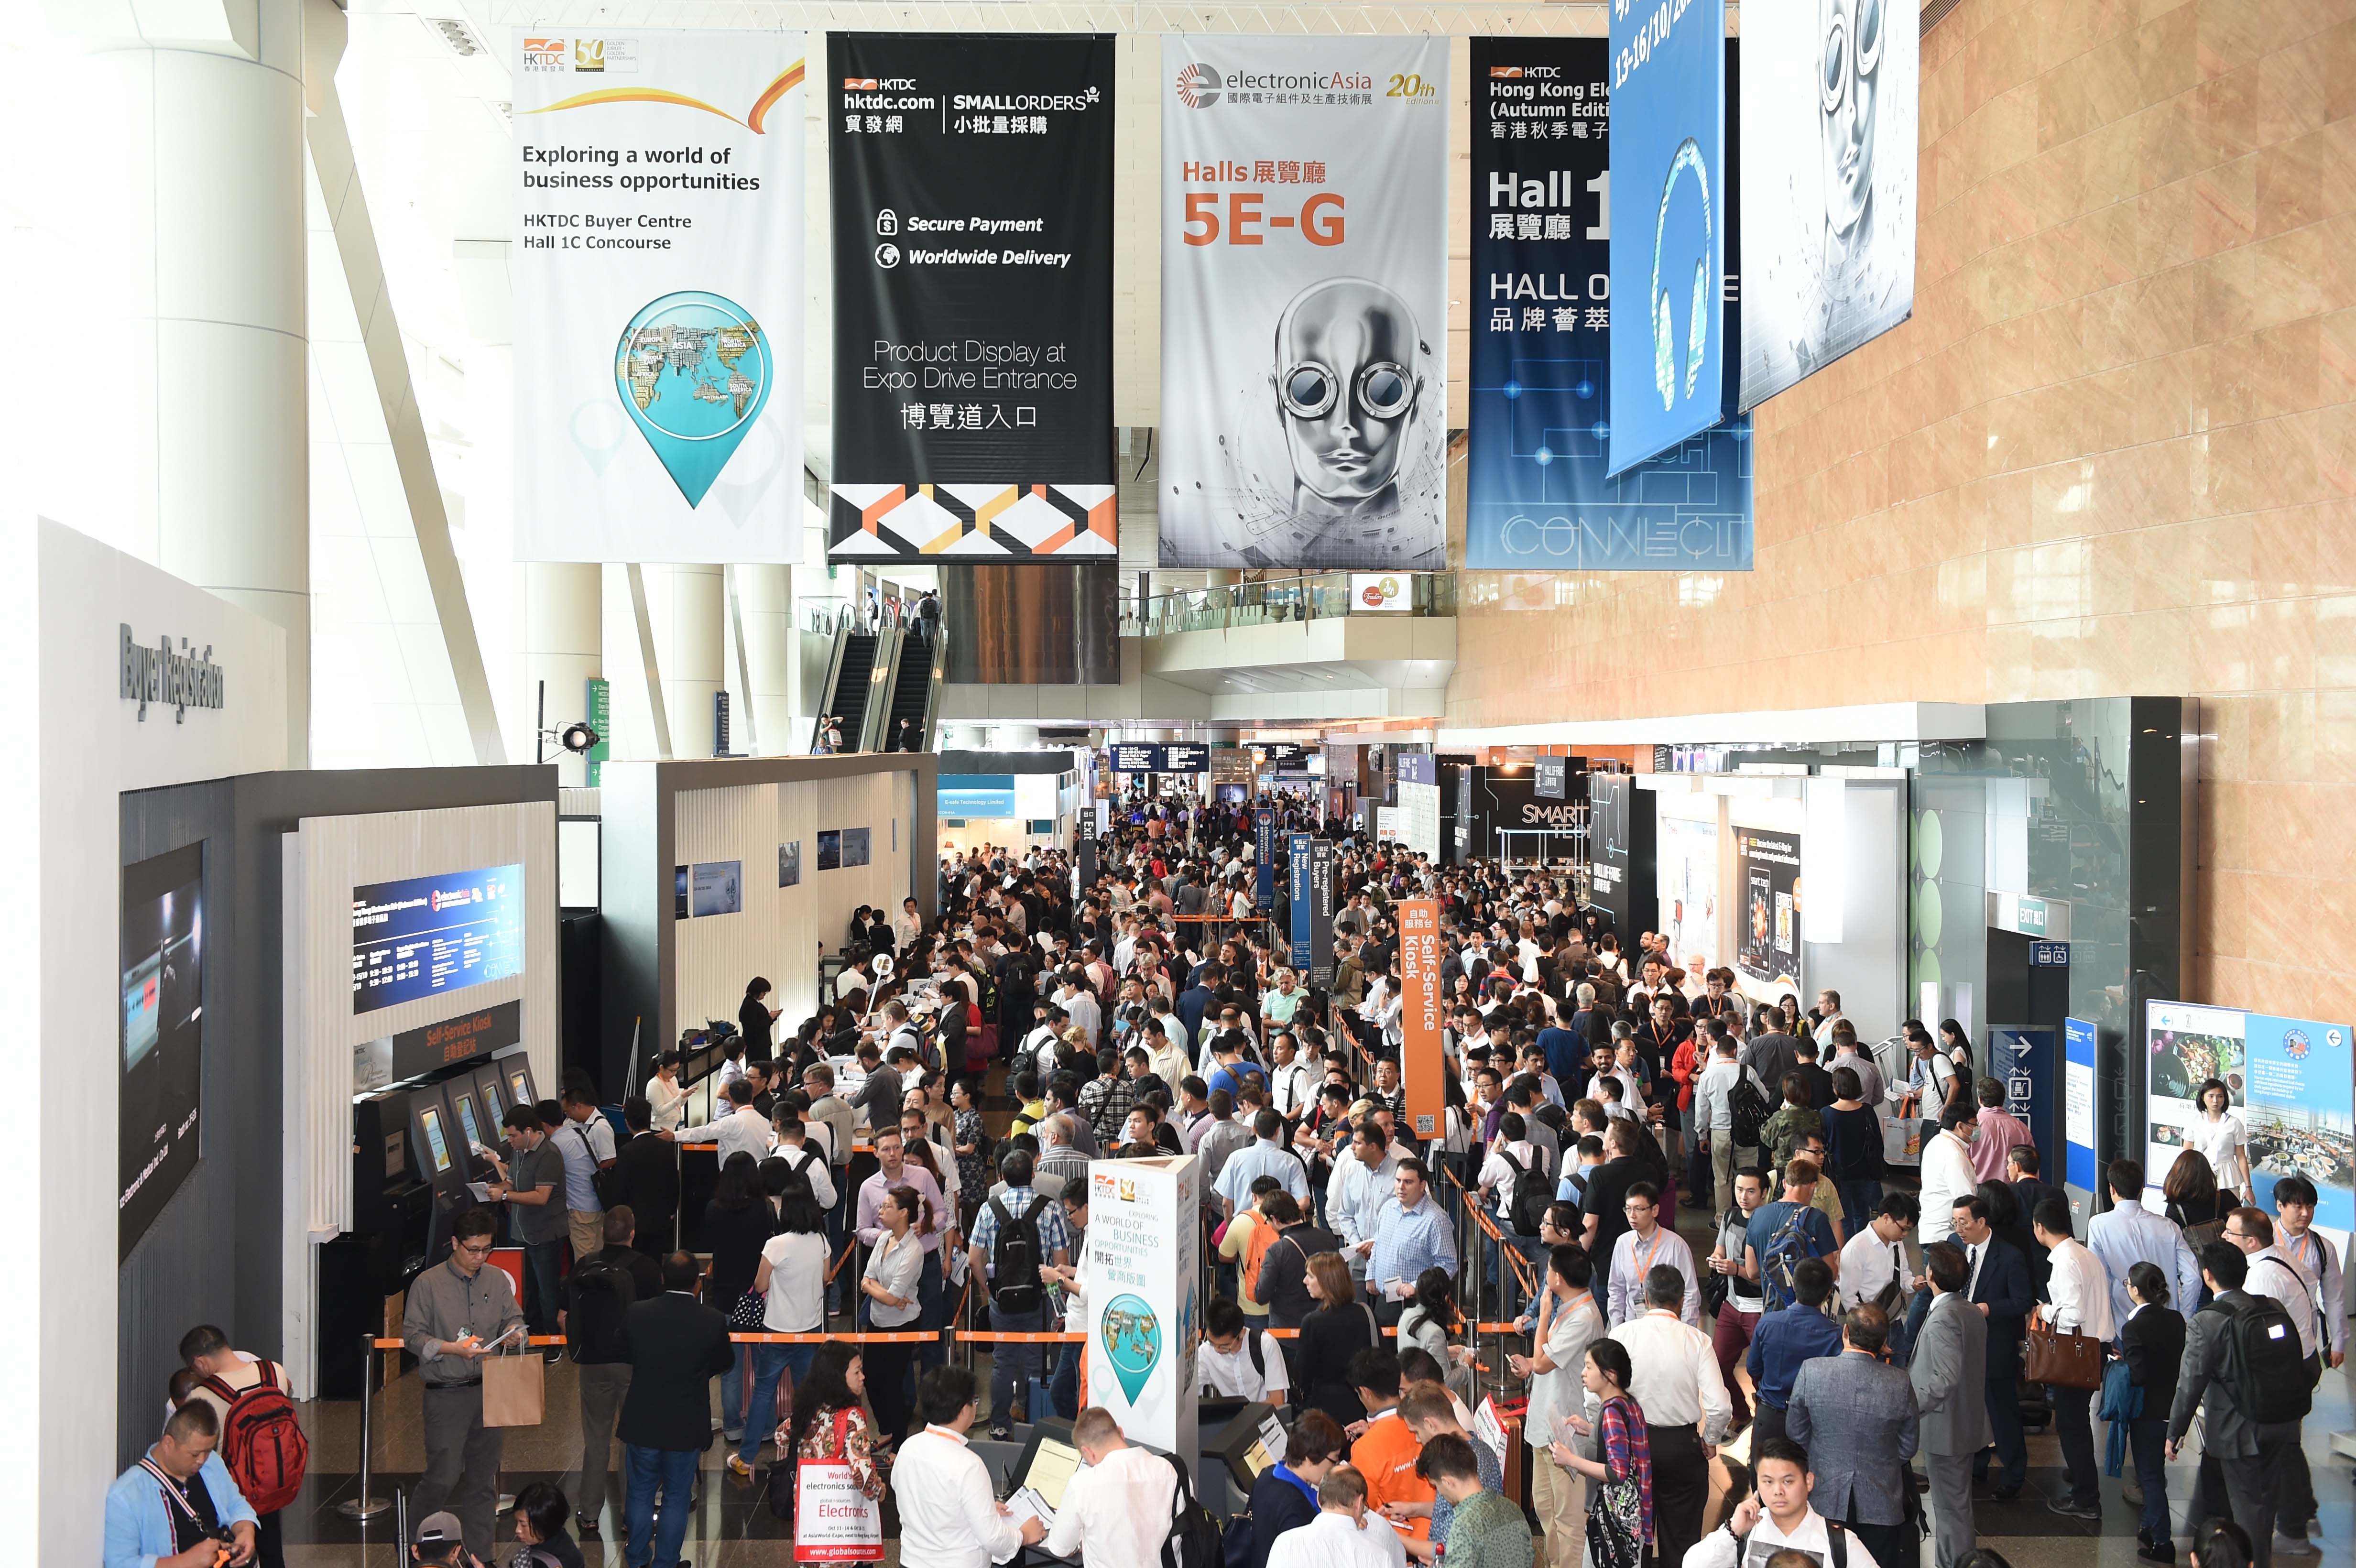 Hong Kong Electronics Fair & electronicAsia Word's Largest